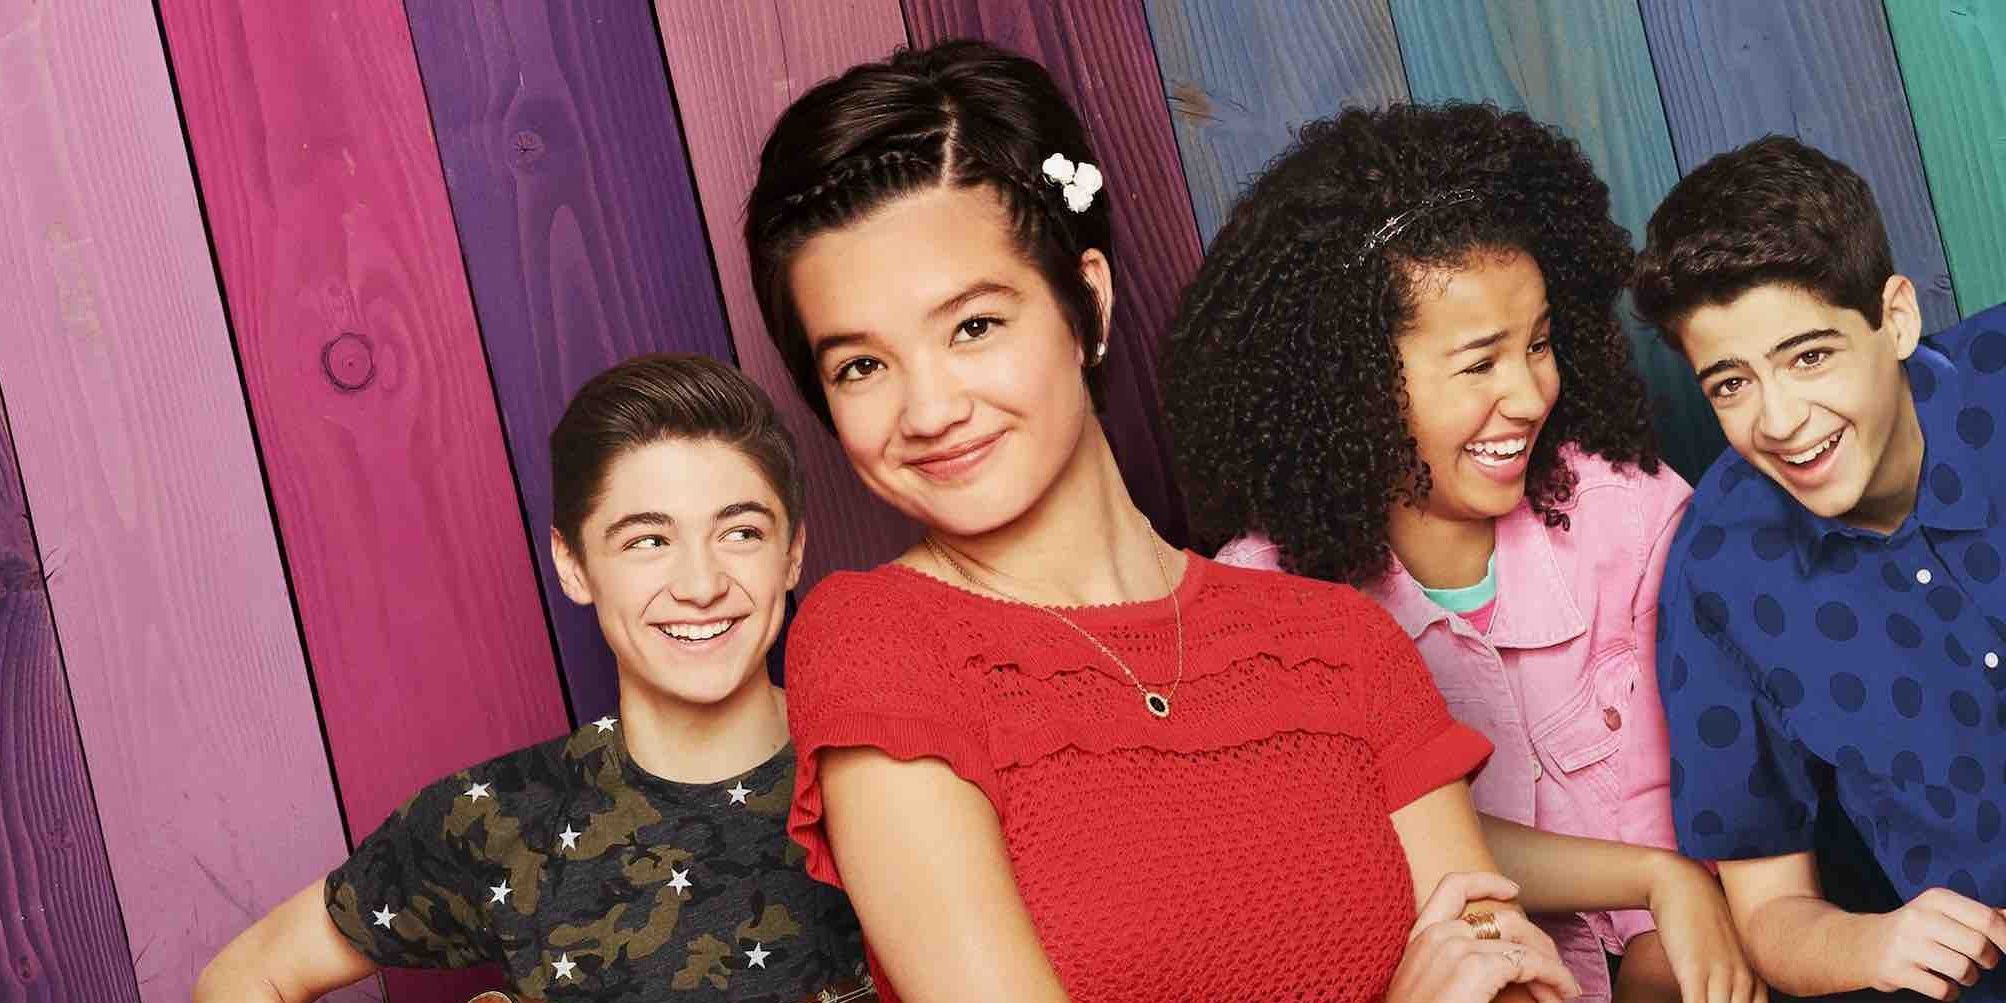 The cast of Andi Mack television series